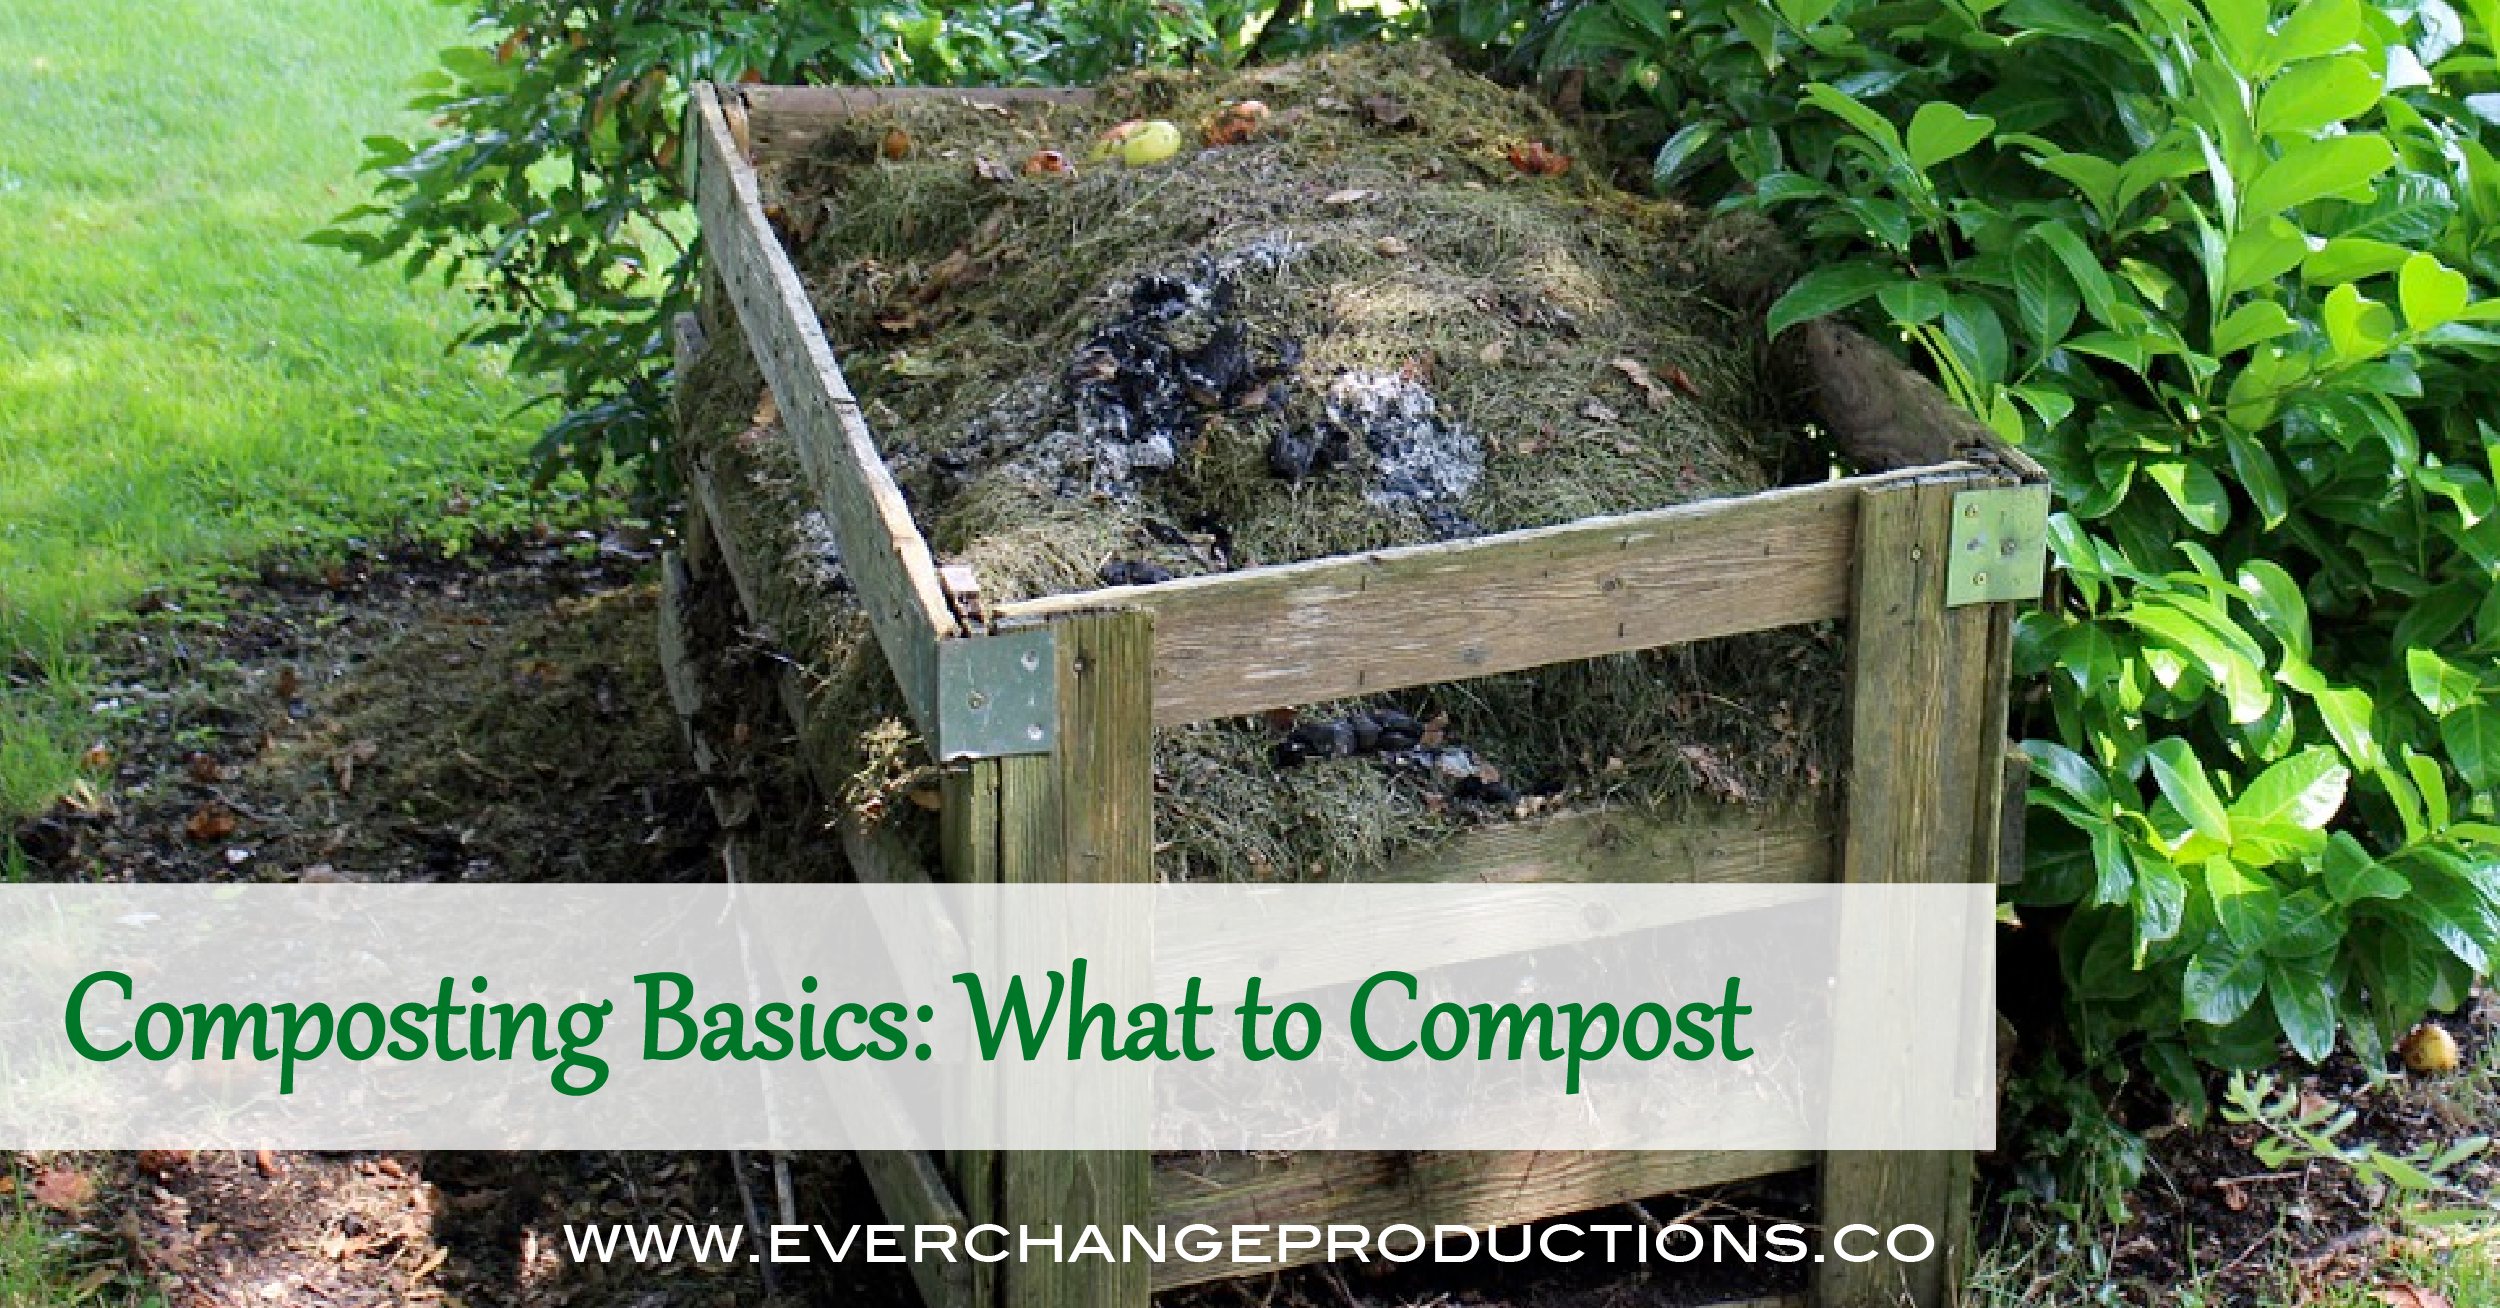 https://www.everchangeproductions.co/wp-content/uploads/2018/03/Composting-basics-01.png